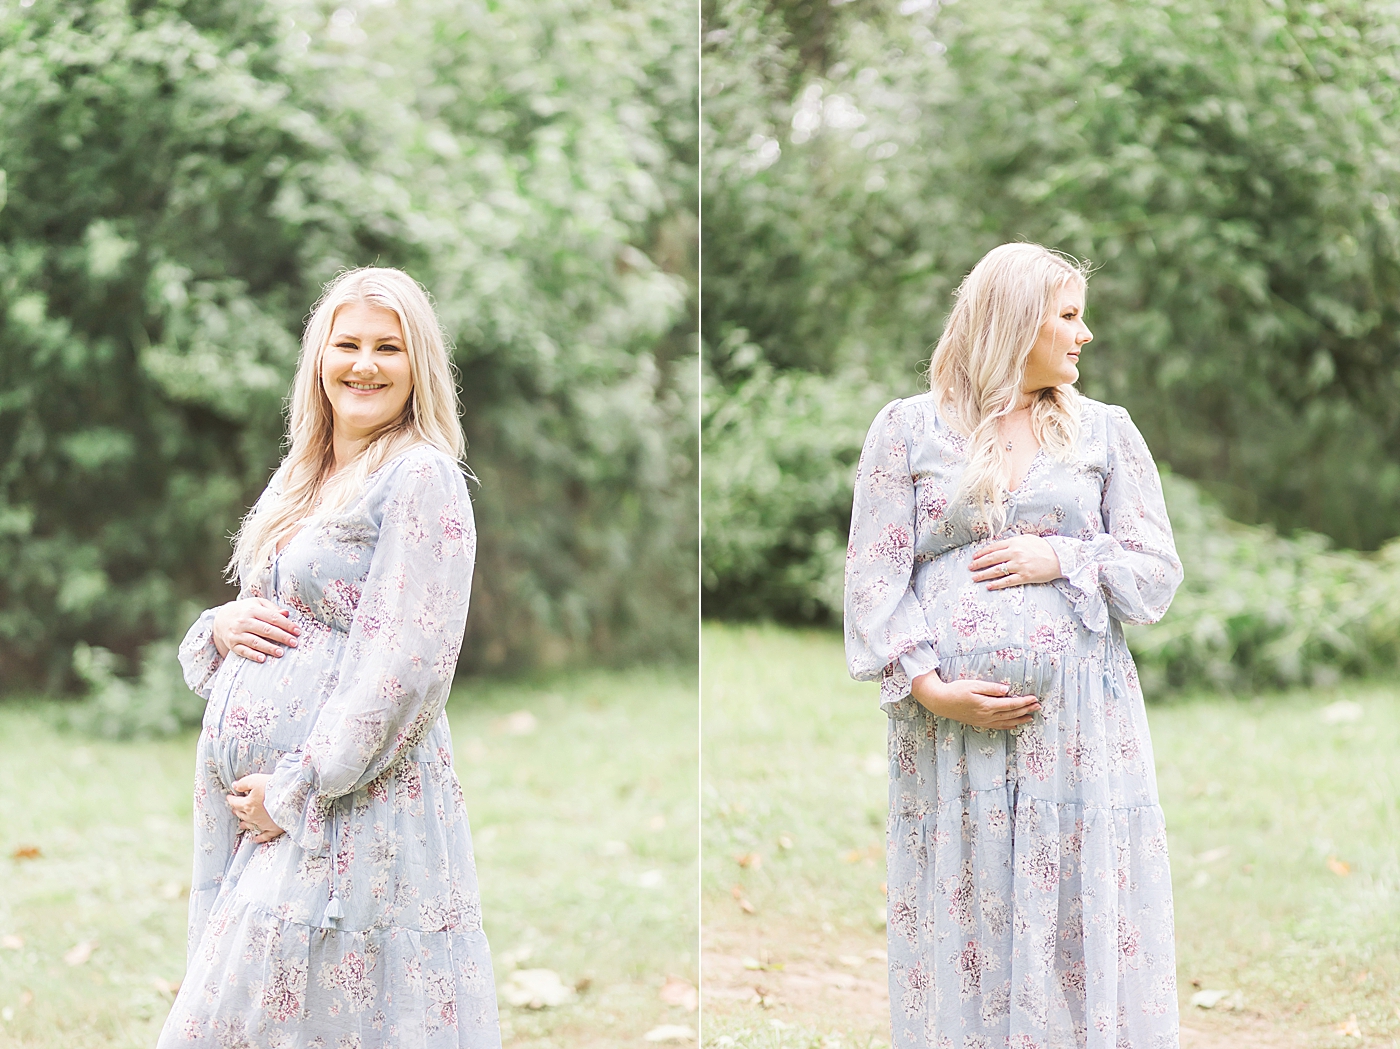 Mom wearing blue floral dress for maternity photoshoot. Photo by Fresh Light Photography.